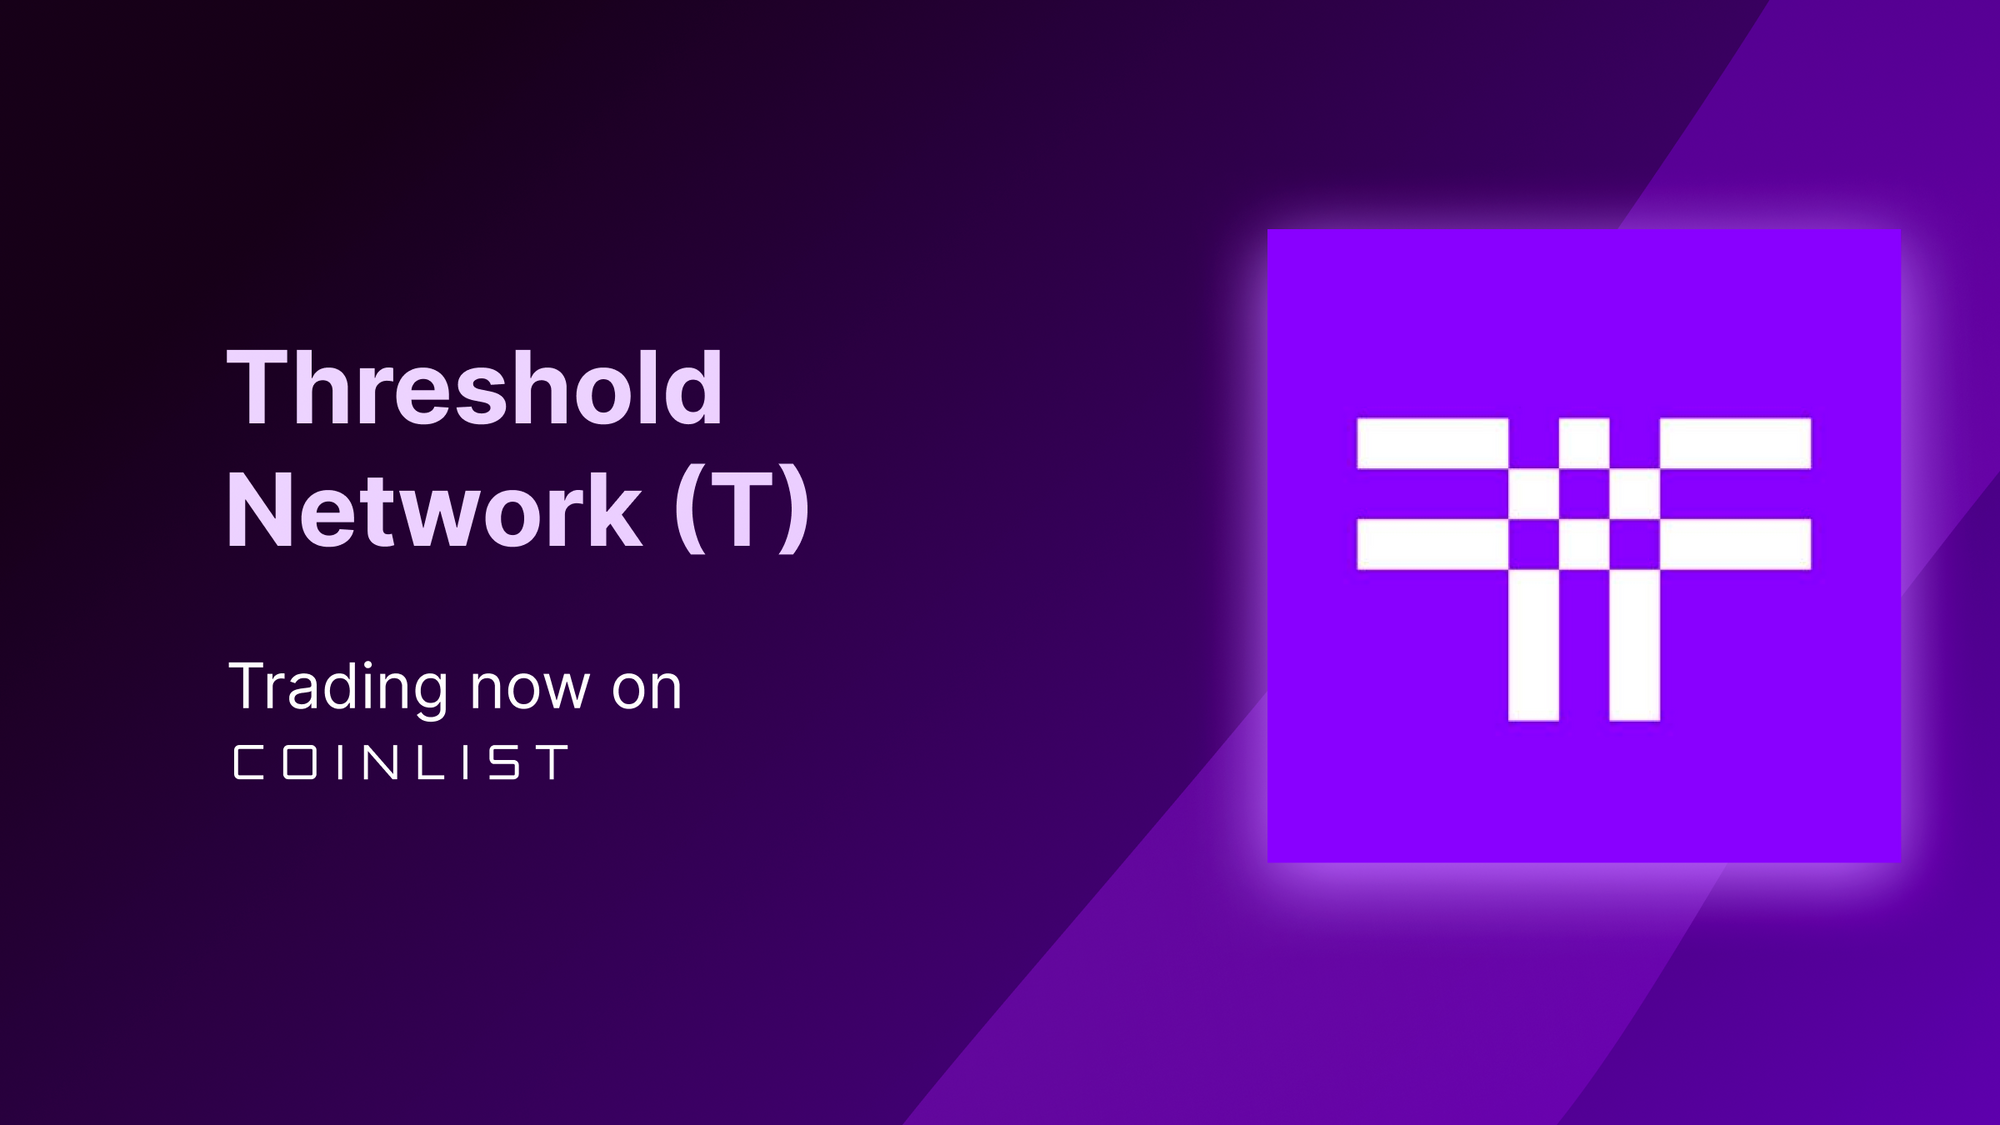 Threshold (T) Trading And Conversions Now Live On CoinList